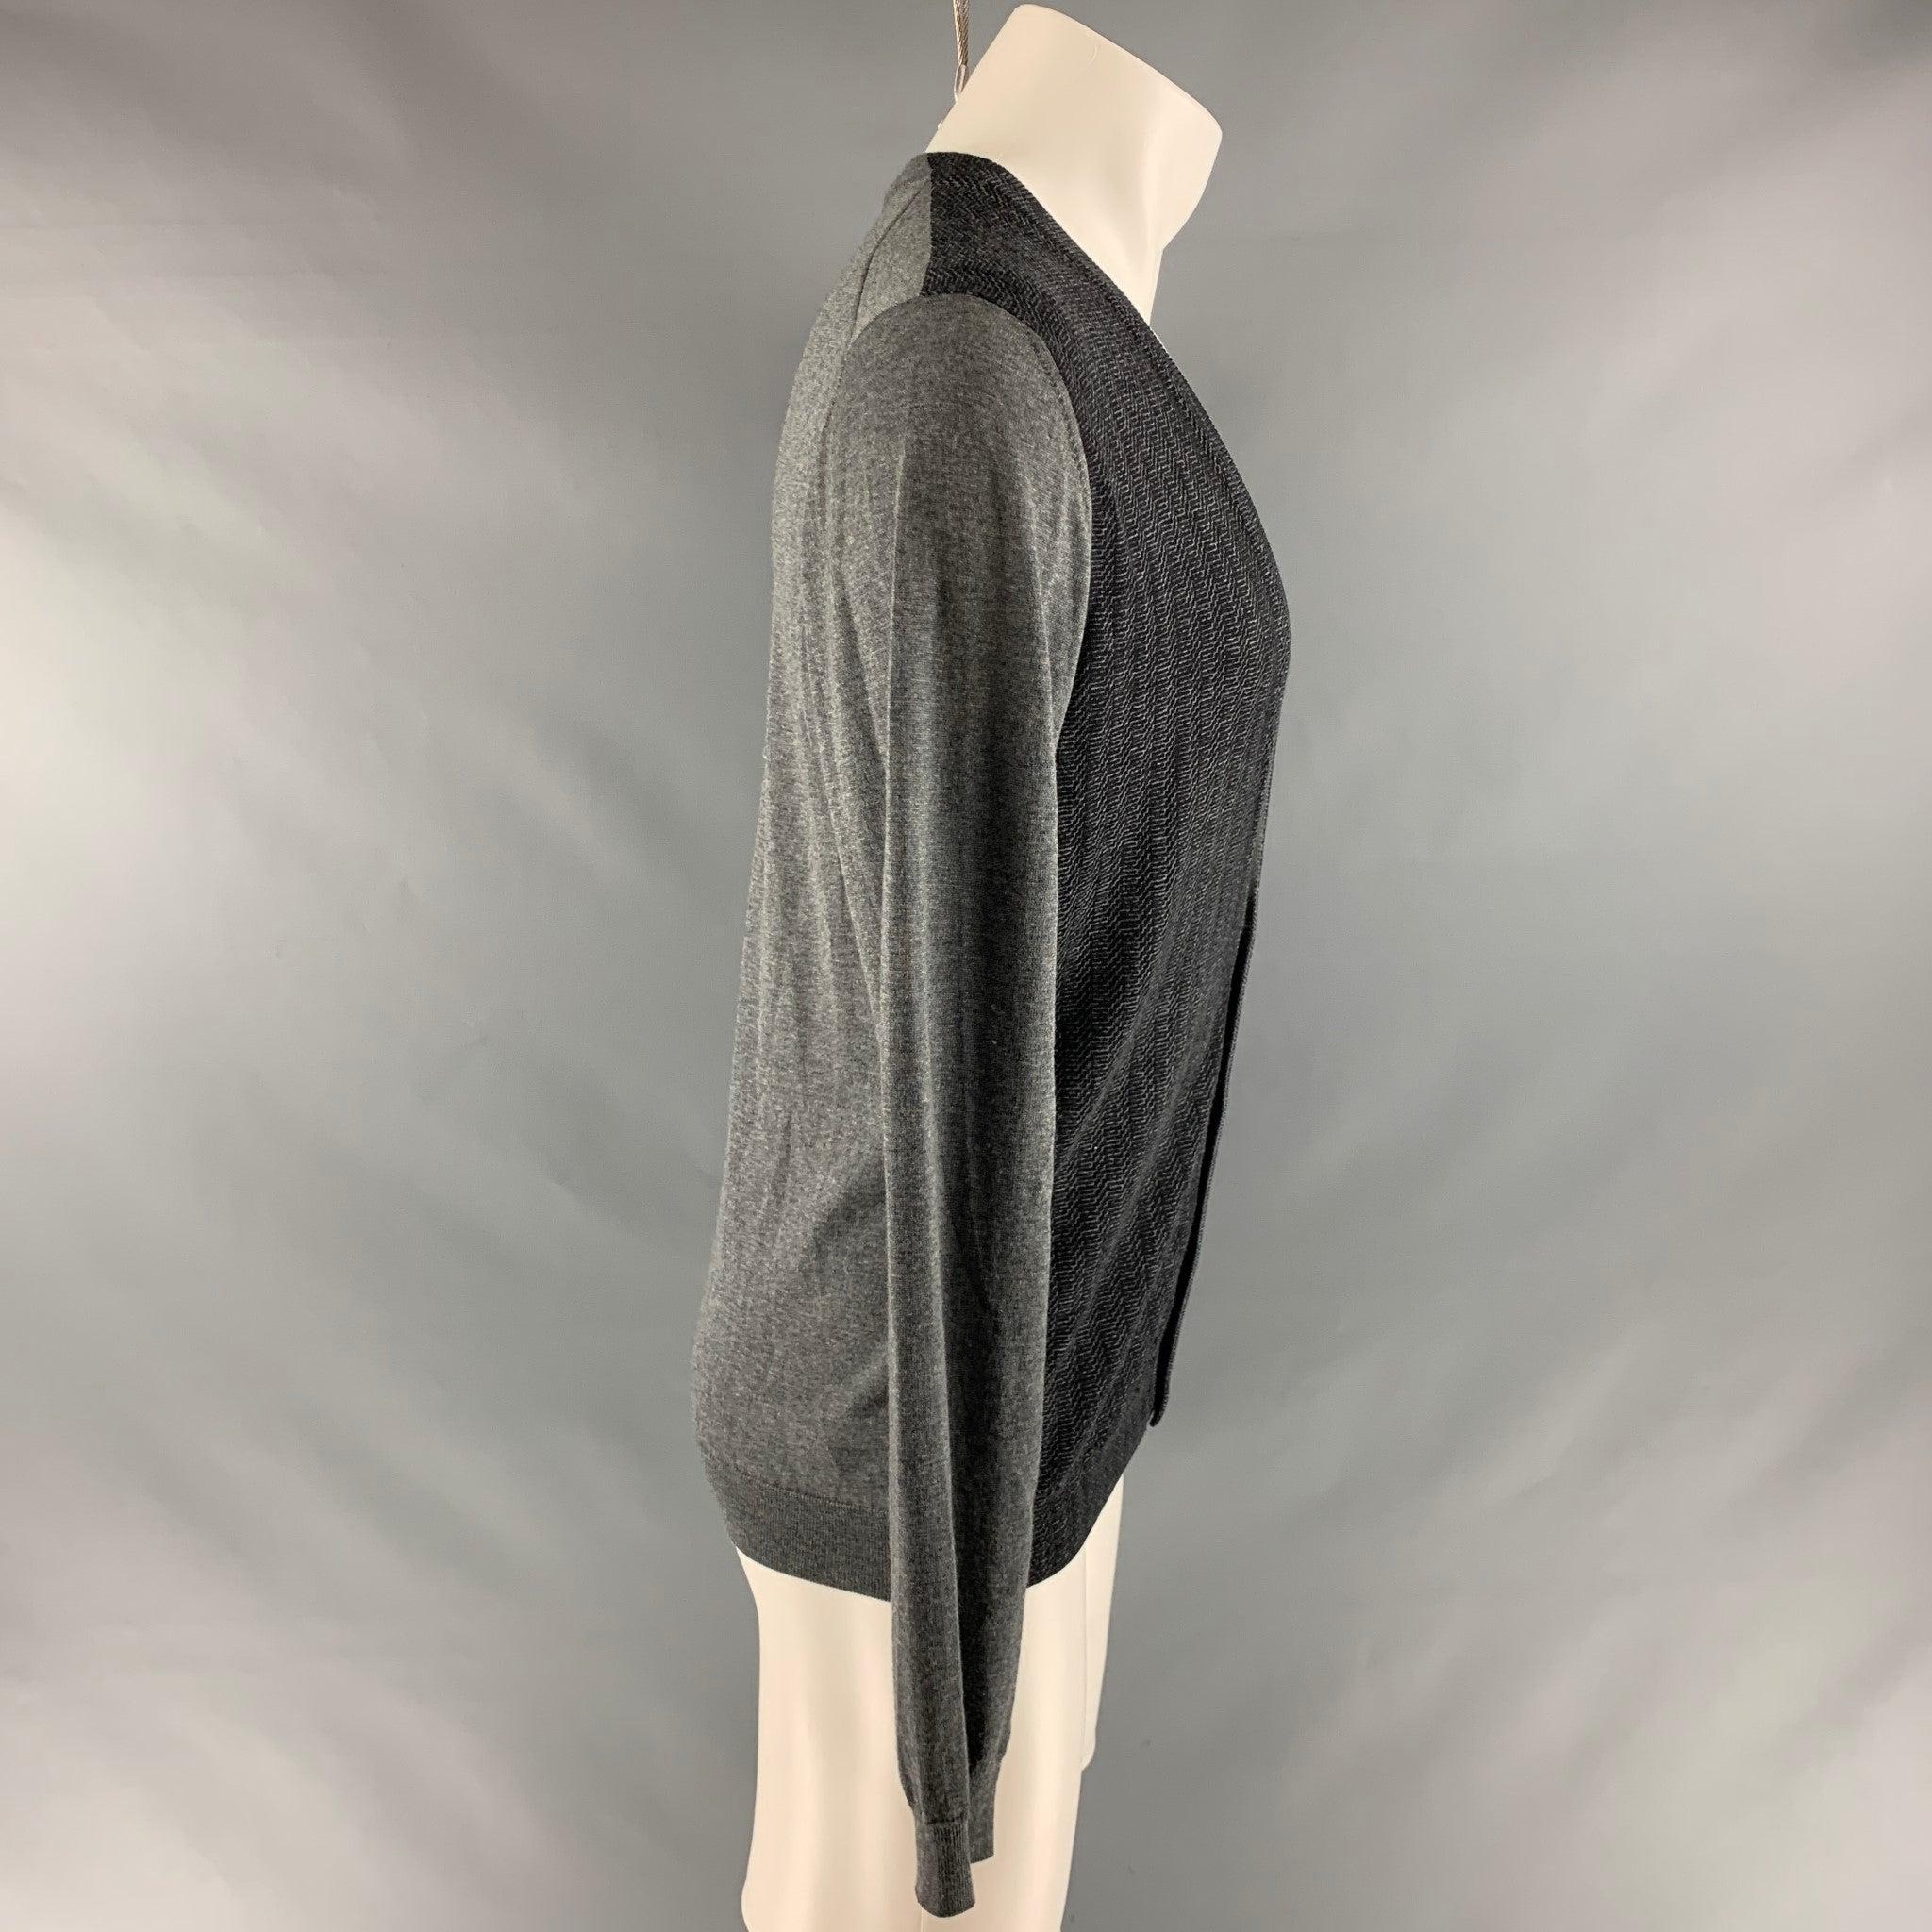 PRADA cardigan comes in a black and grey knitted wool featuring a ribbed panel and a v-neck, and button closure. Made in Italy. Excellent Pre-Owned Condition. 

Marked:   48 

Measurements: 
 
Shoulder: 17.5 inches Chest: 42 inches Sleeve: 26.5